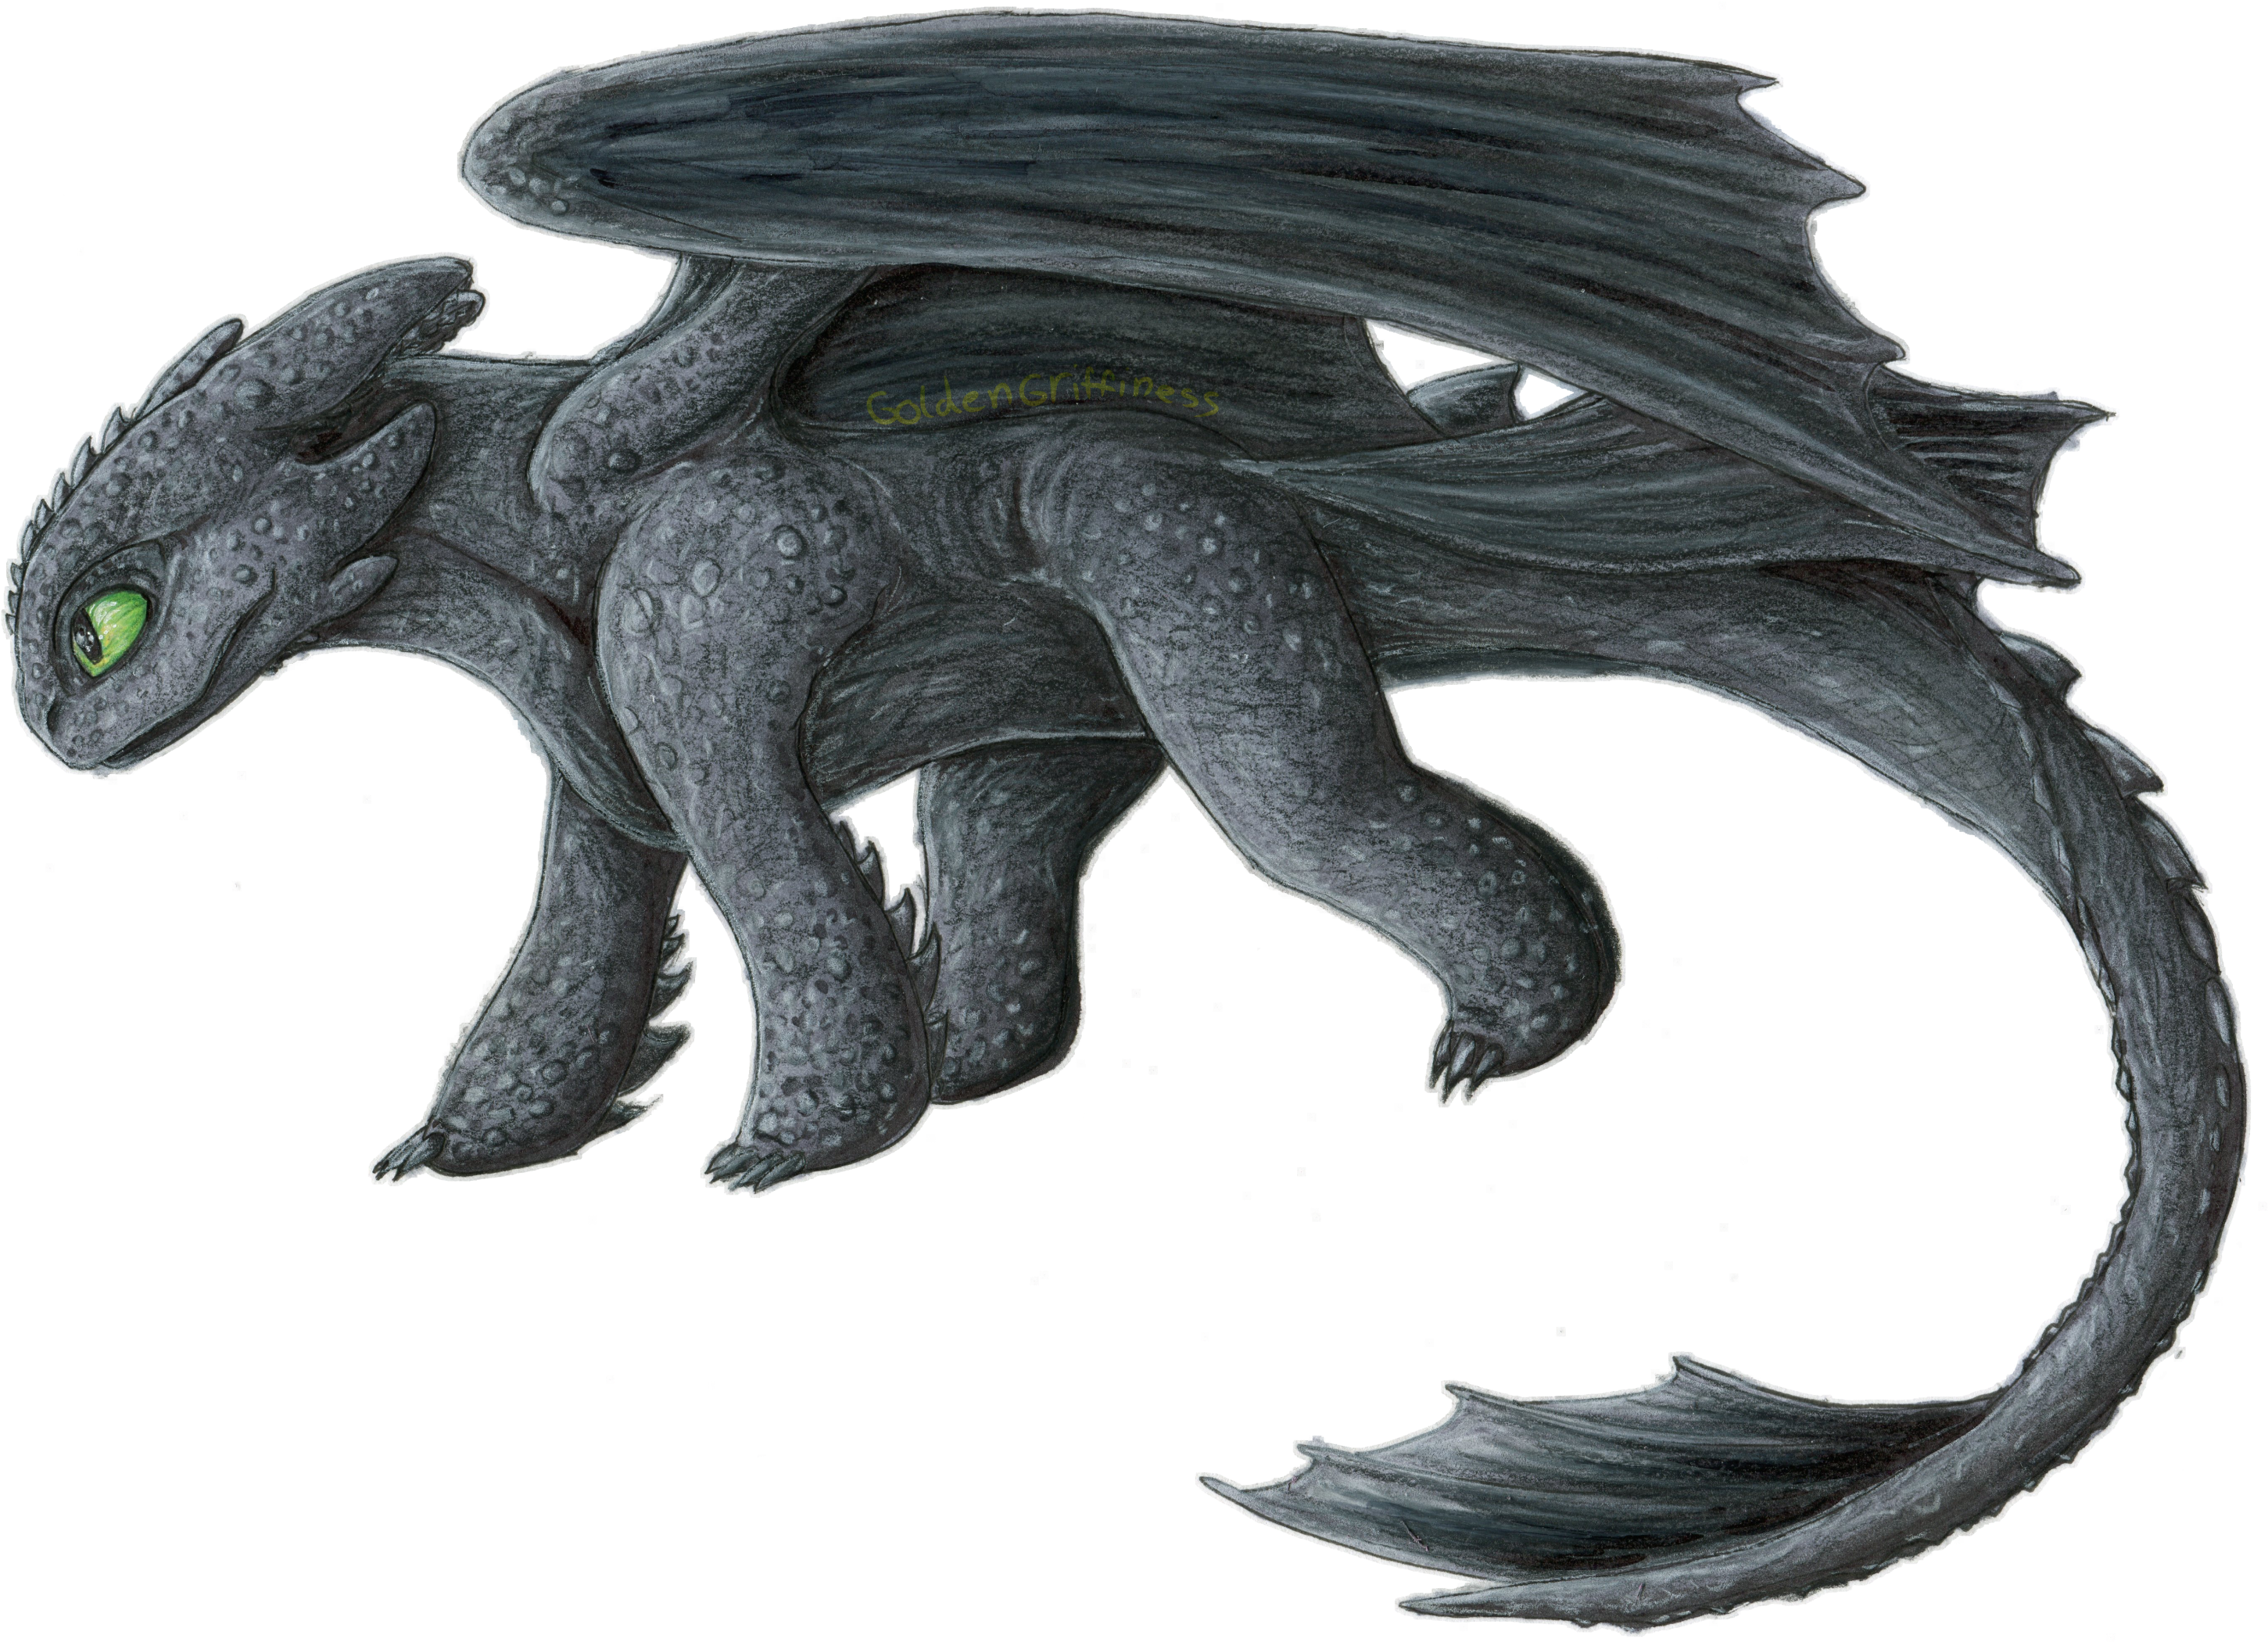 Palate Ineffective Toothless Ineffectual Dragon PNG